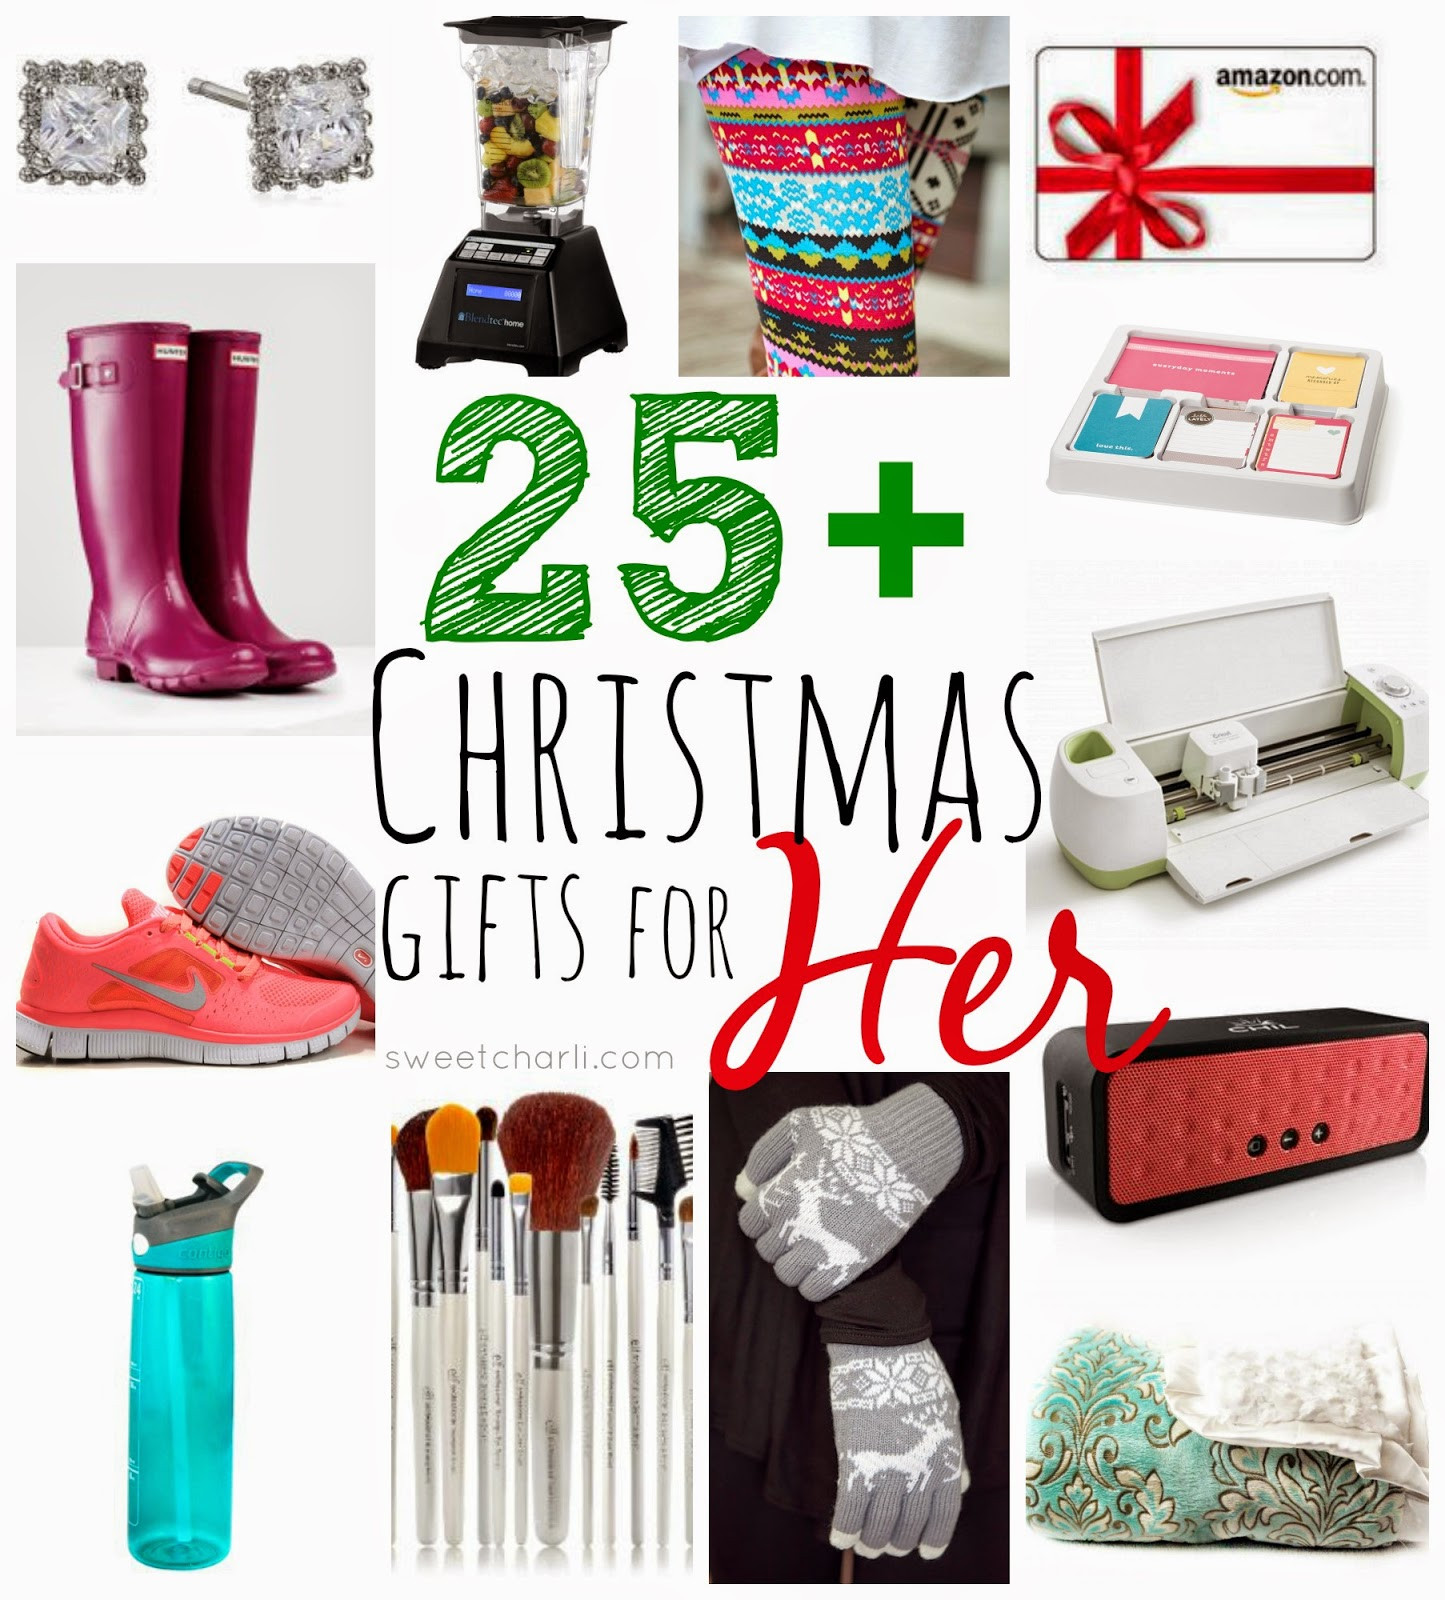 Gift Ideas For Her Christmas
 25 Christmas Gifts for Her Sweet Charli